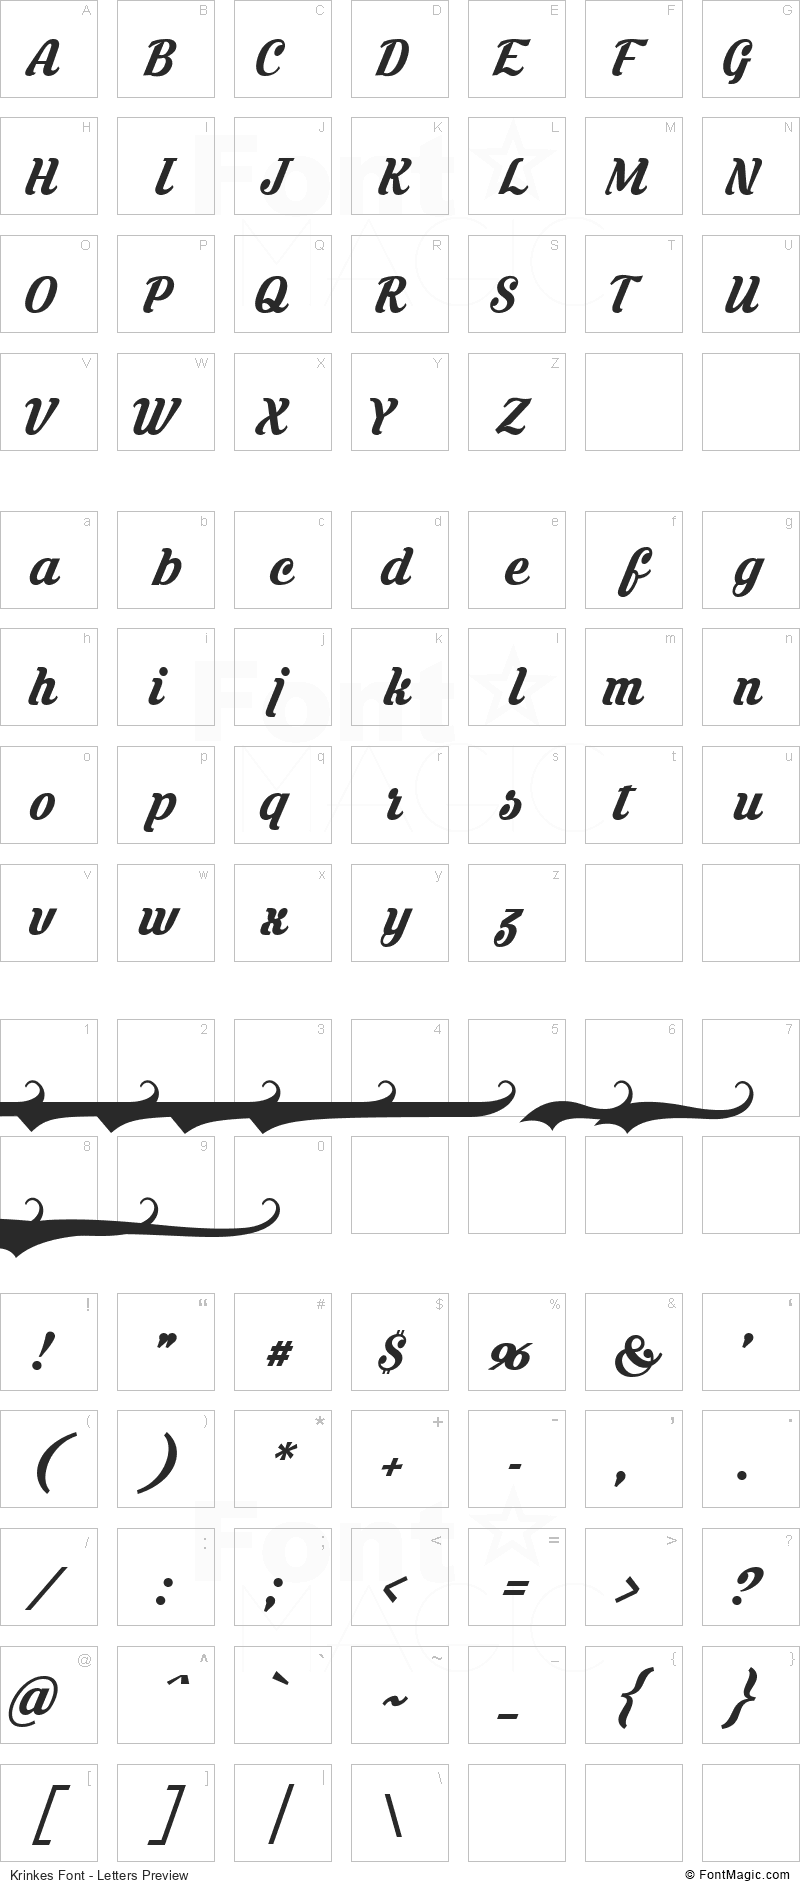 Krinkes Font - All Latters Preview Chart